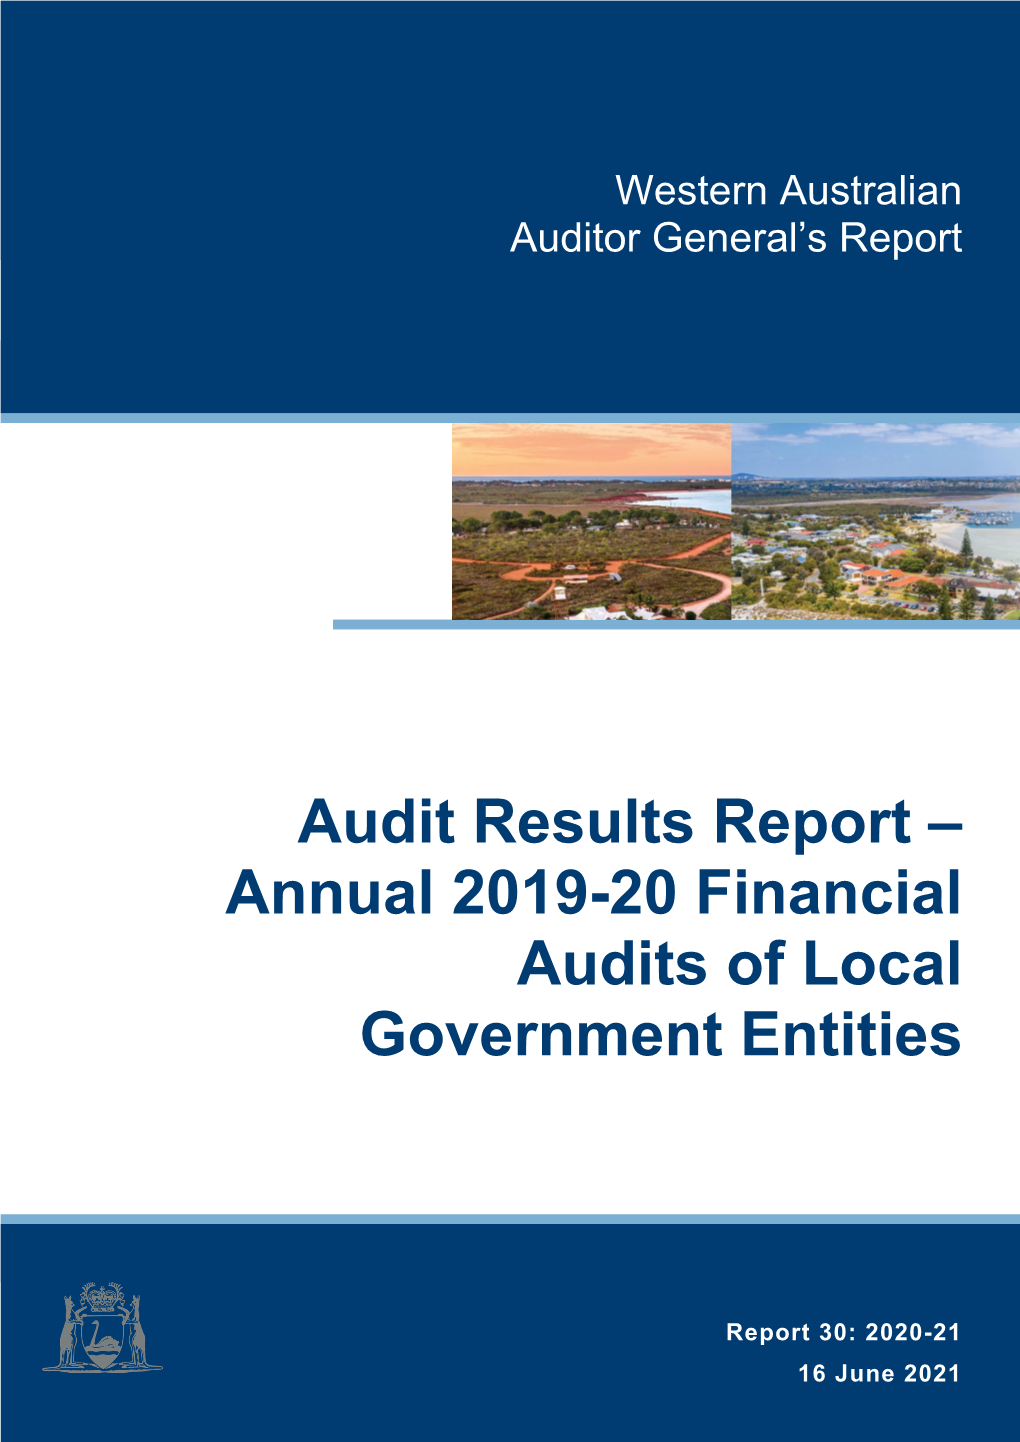 Audit Results Report – Annual 2019-20 Financial Audits of Local Government Entities